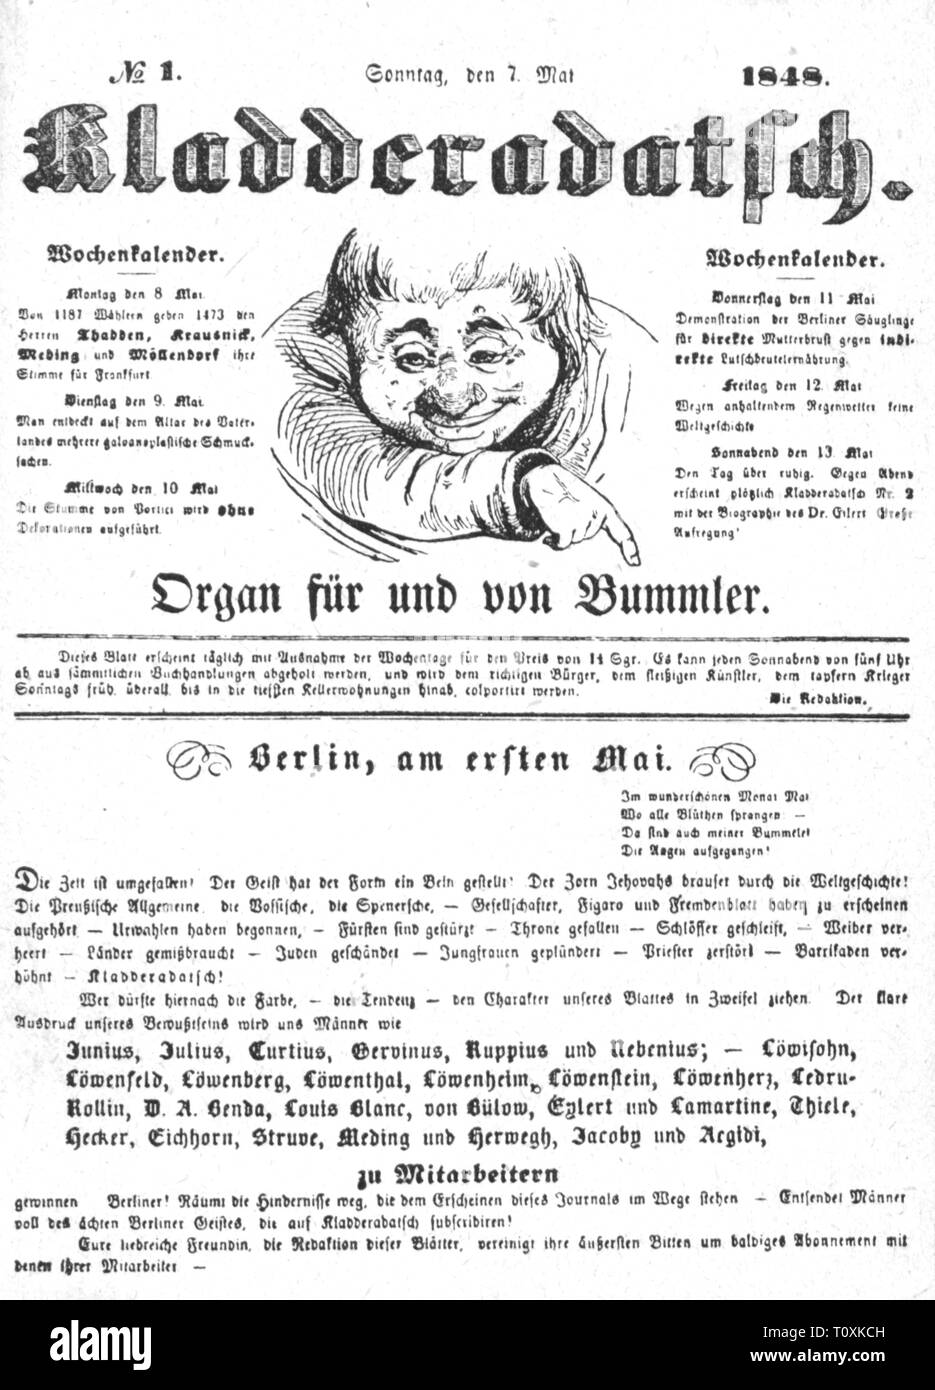 press / media, magazines, 'Kladderadatsch', front page, number 1, Berlin, 7.5.1848, Germany, Prussia, graphic, graphics, script, scripts, title, titles, german type, satirical magazine, humor, humour, satire, drawing, typo, typeface, type, typefaces, fonts, types, font, first issue, 19th century, press, presses, number, numbers, historic, historical, people, Additional-Rights-Clearance-Info-Not-Available Stock Photo